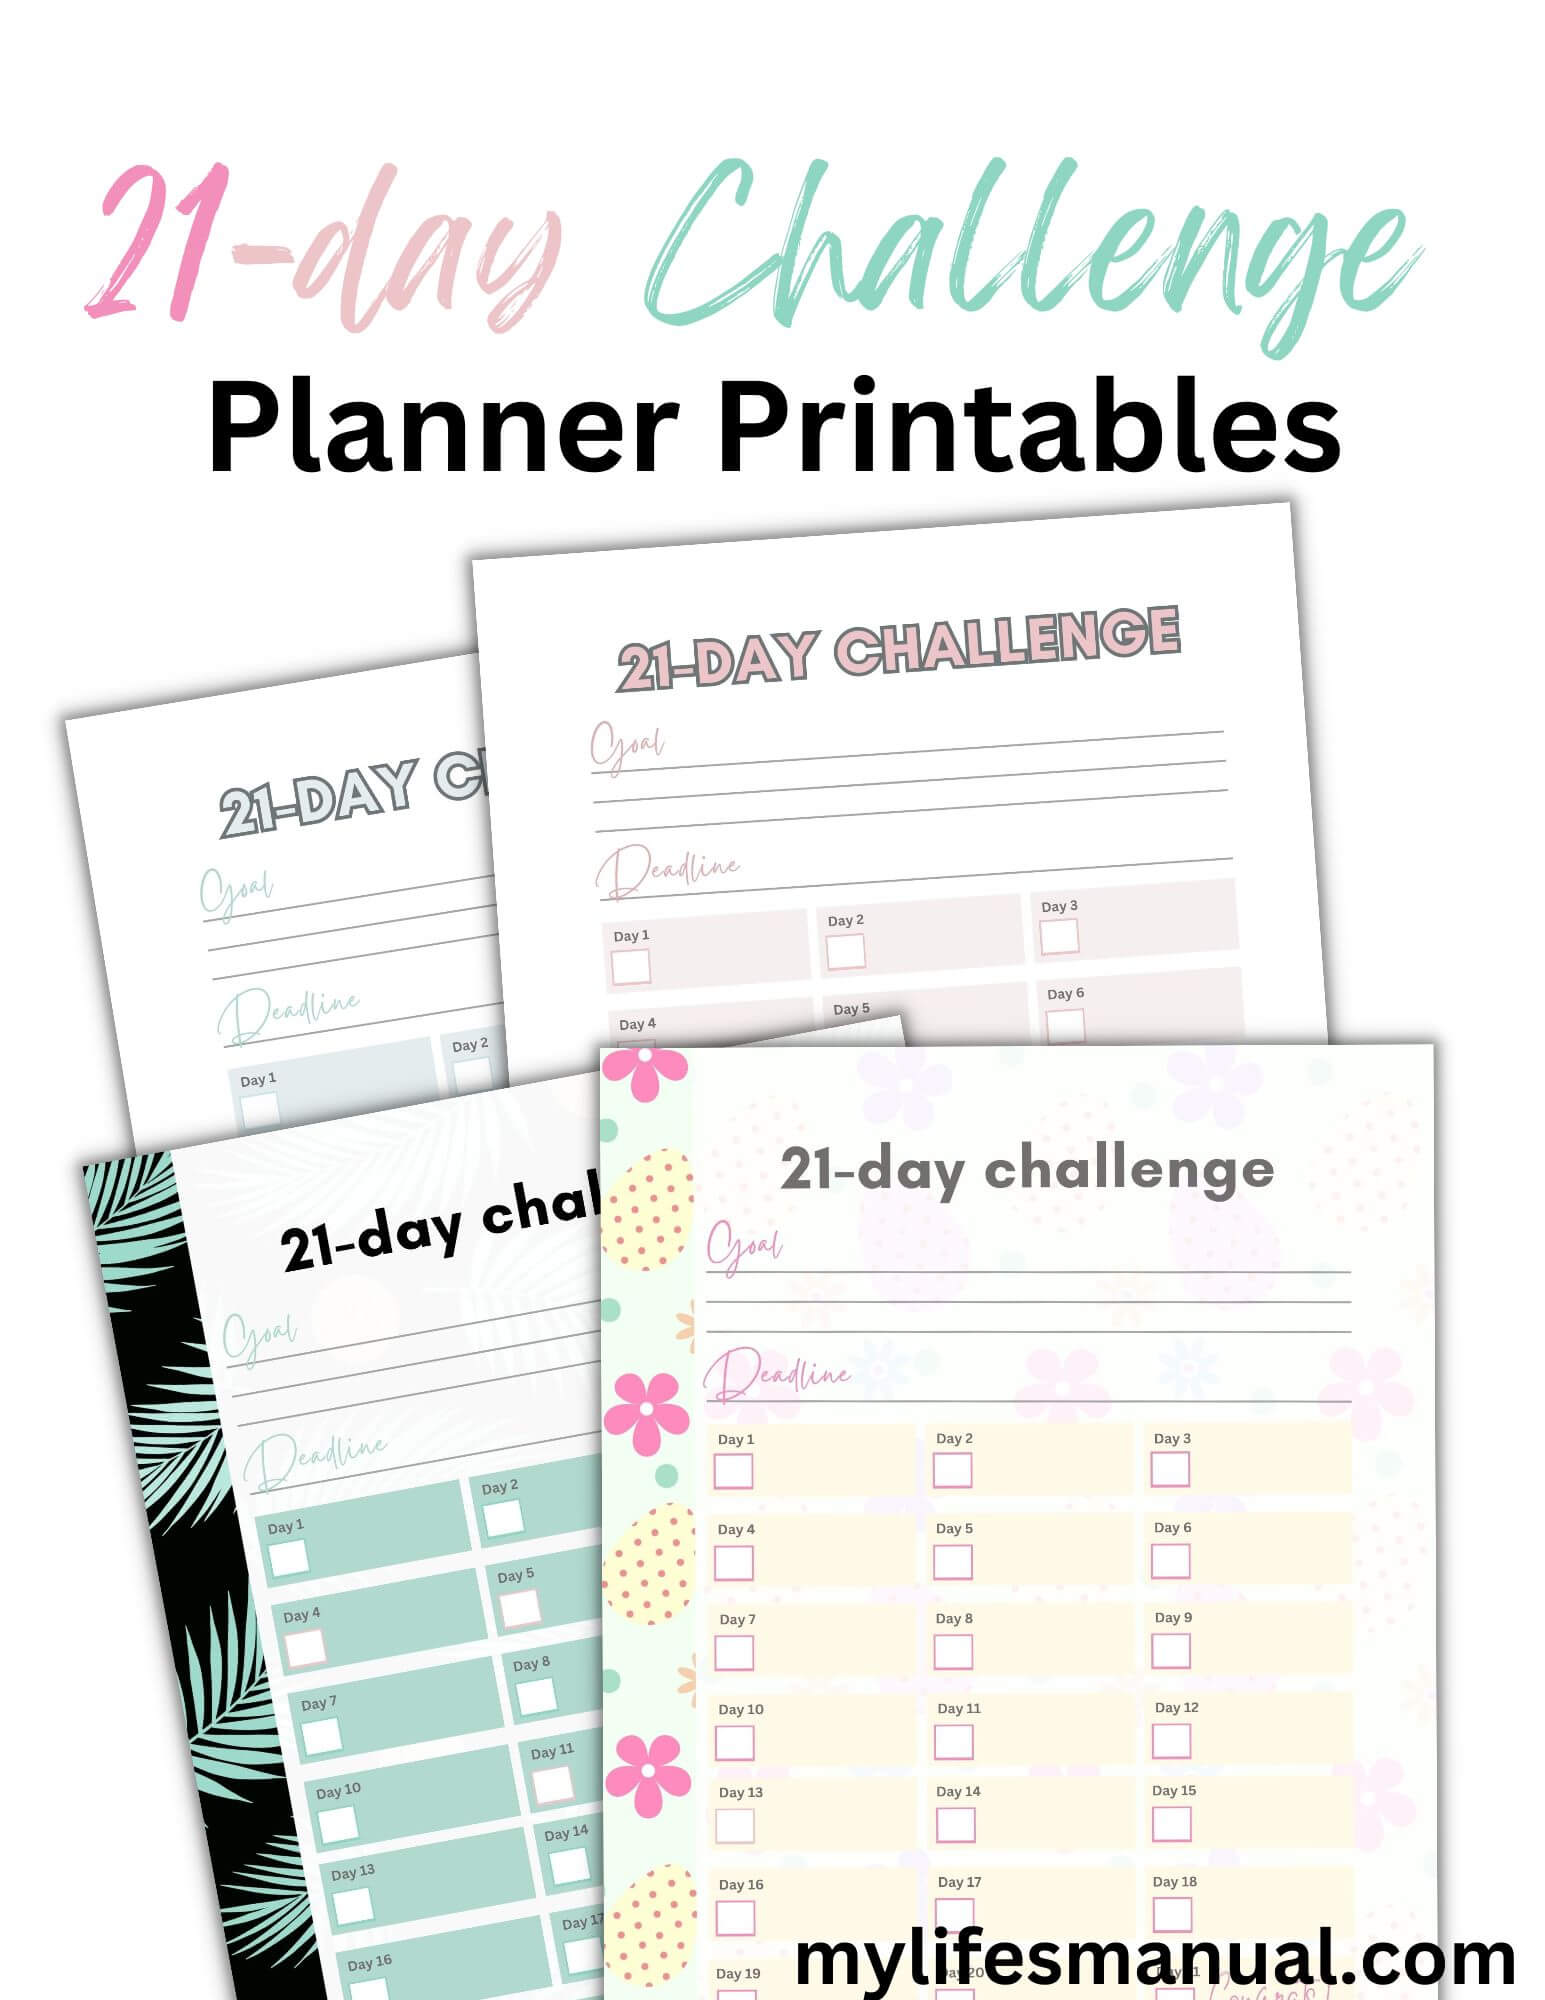 21-Day Challenge Printable Planner. Are you up for the challenge of doing what you MUST do daily? Consistently until it becomes a habit? Are you ready to get things done even if you feel lazy and unmotivated?